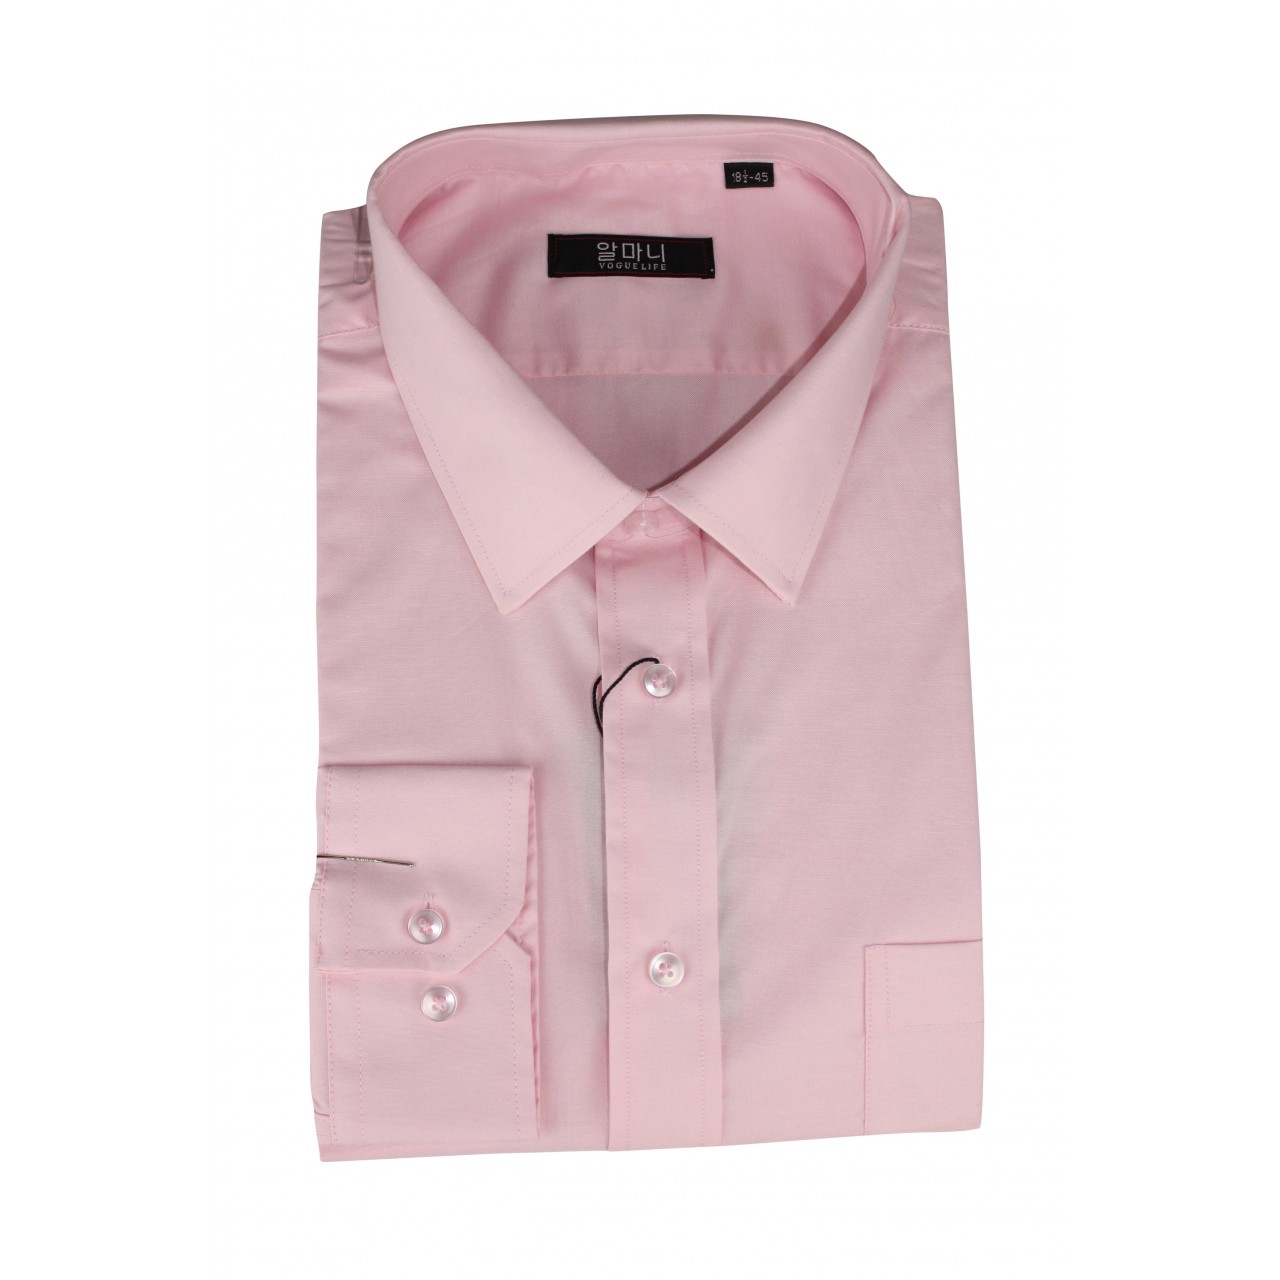 Basic Button Up Long Sleeve VOGUELIFE Mens Rose Shirt With A Tie